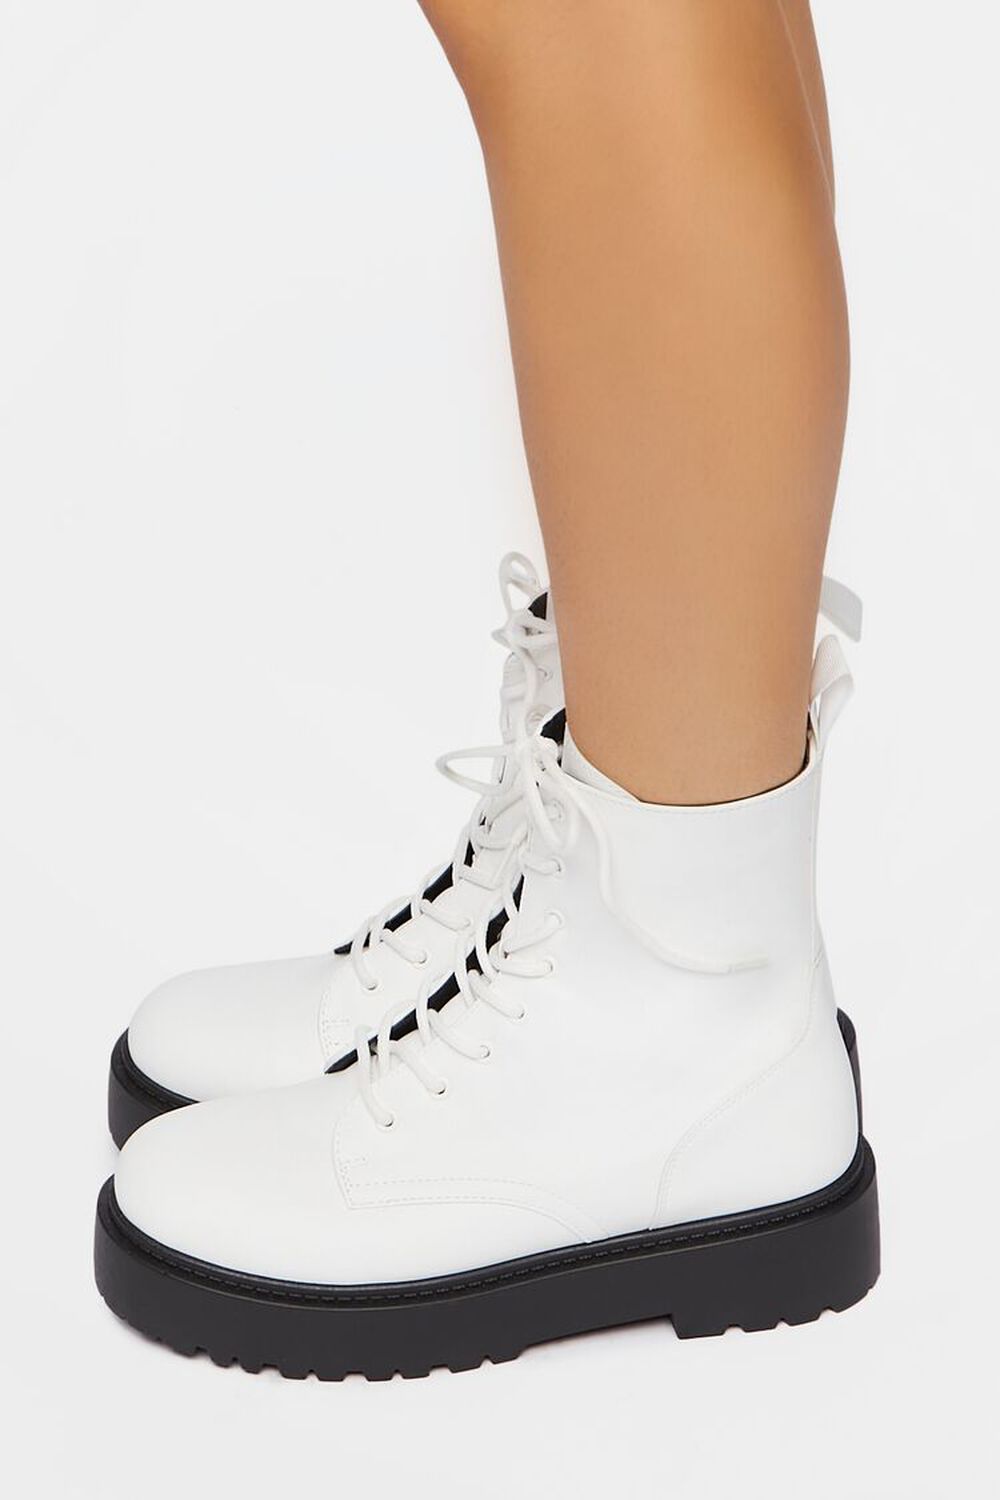 WHITE Faux Leather Combat Boots, image 2